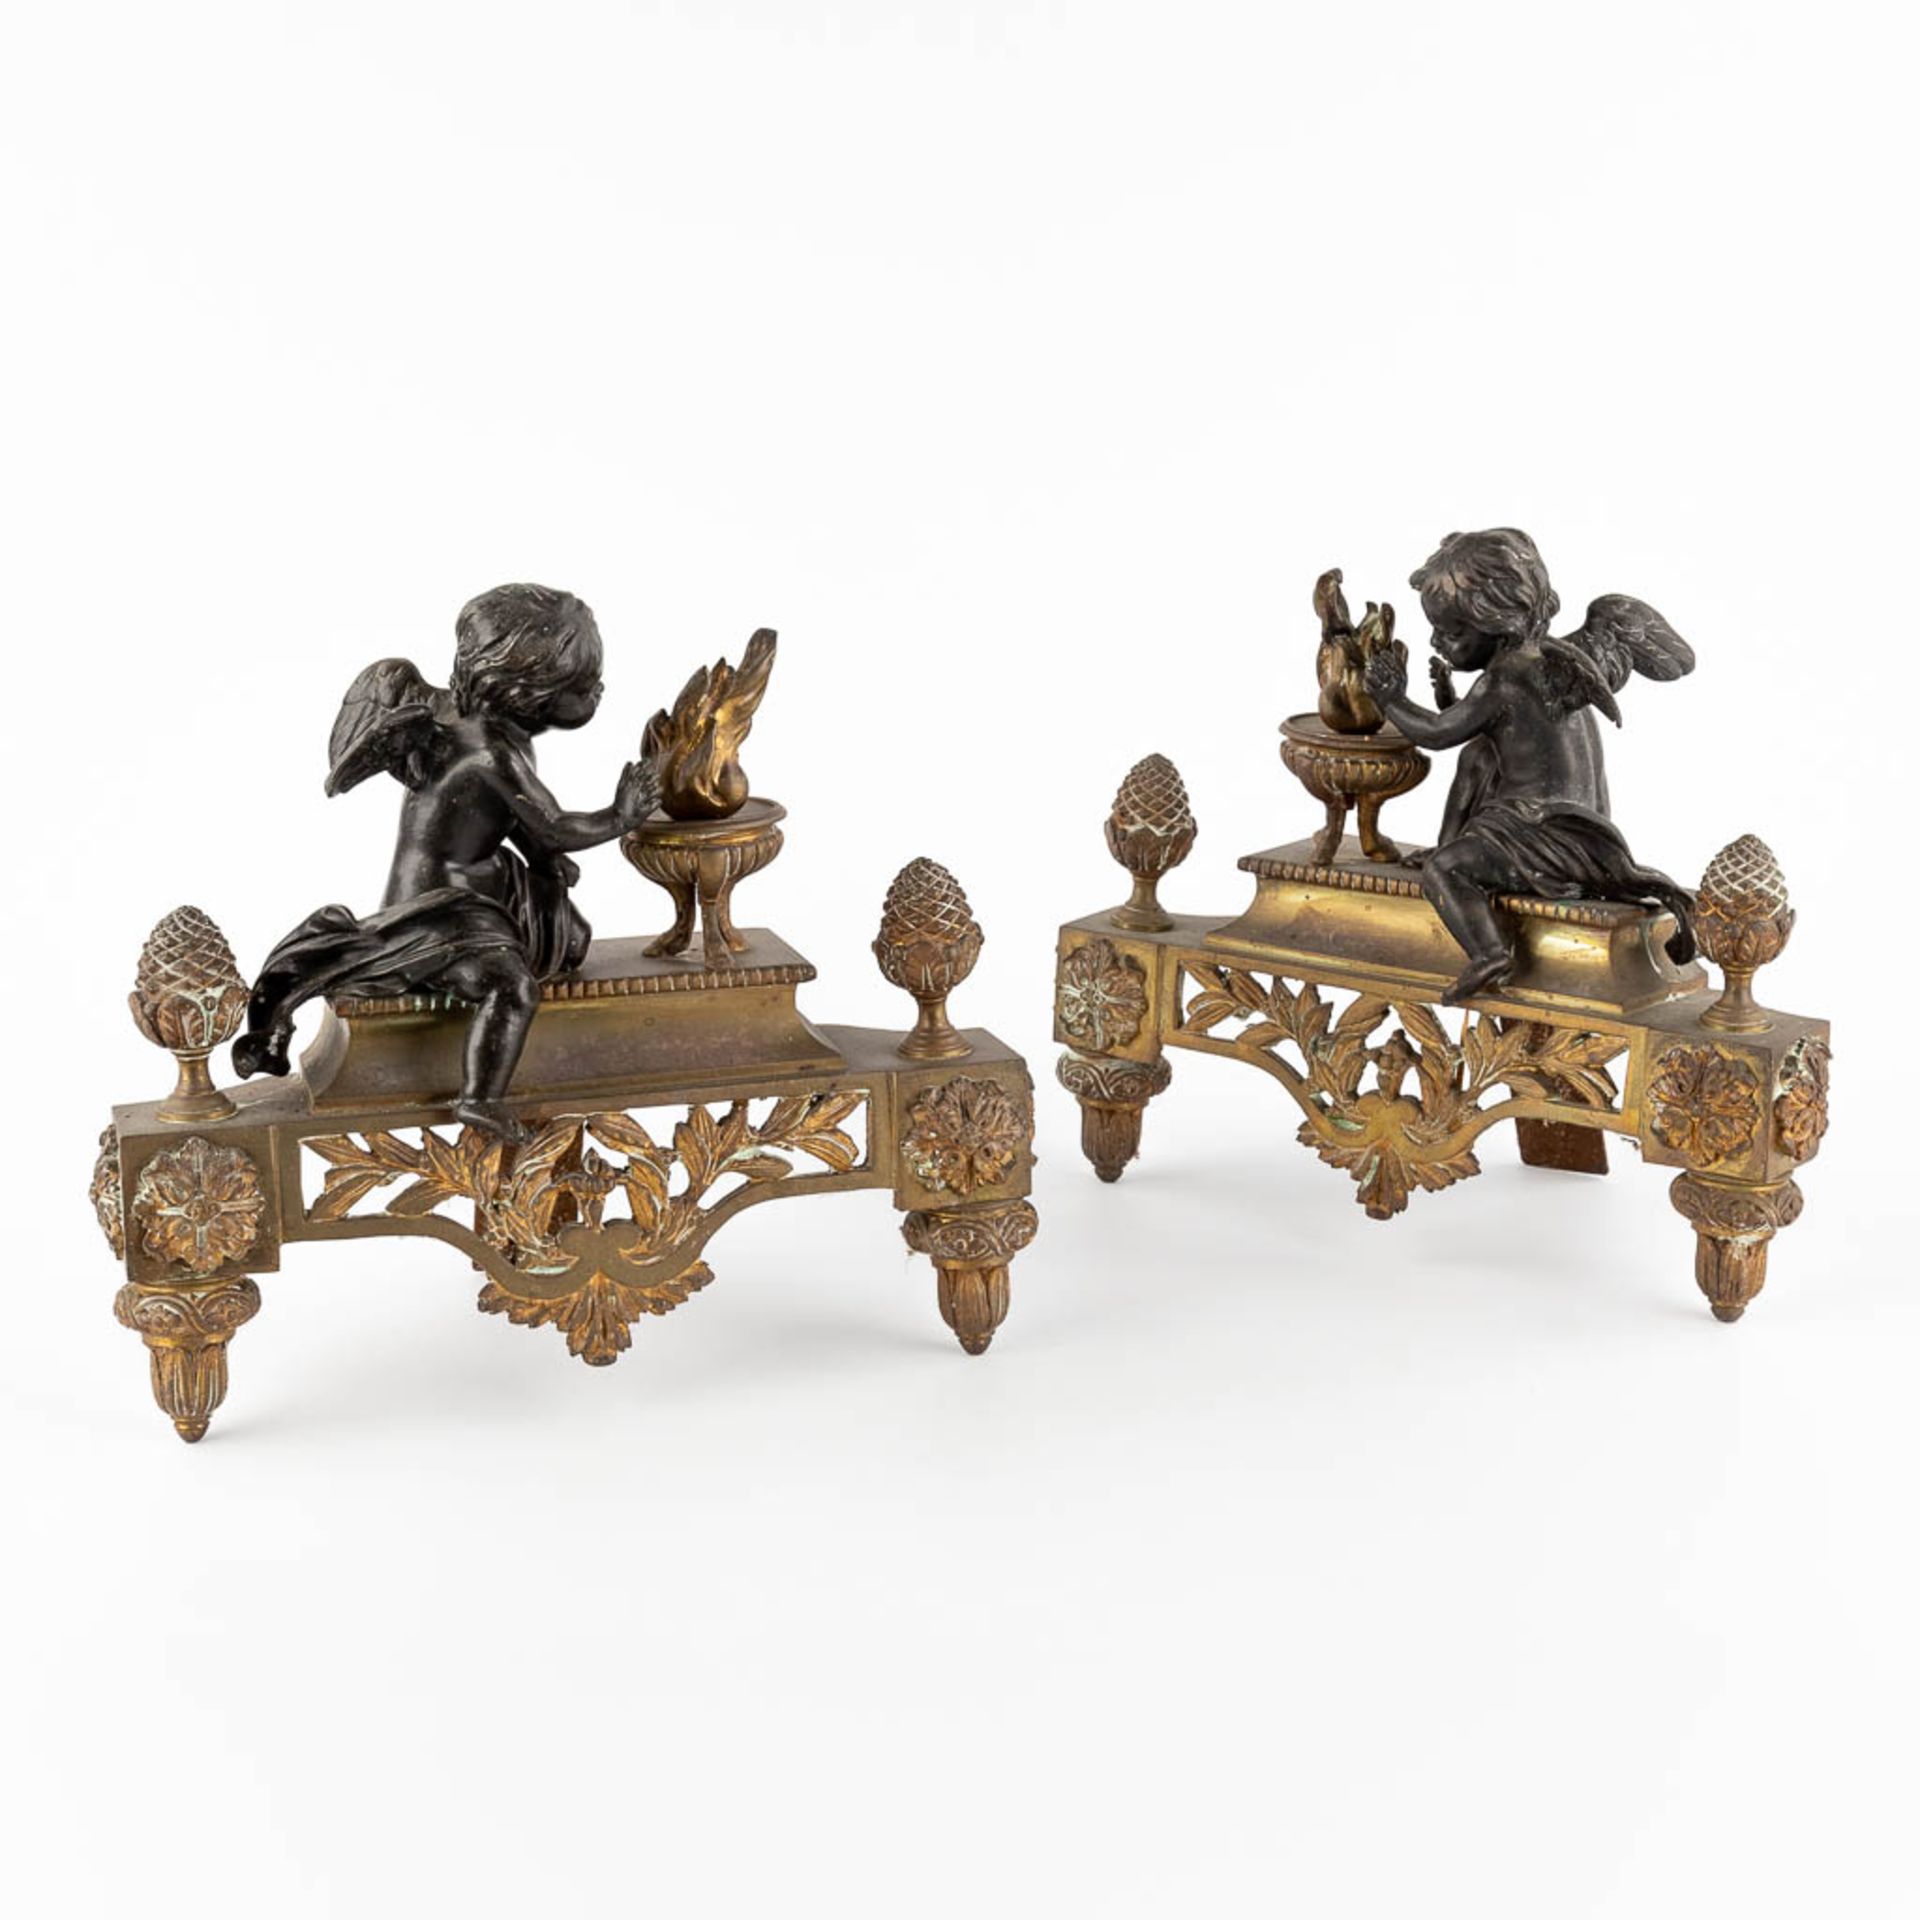 A pair of bronze fireplace andirons, gilt and patinated bronze, Louis XVI style. Circa 1900. (W:30 x